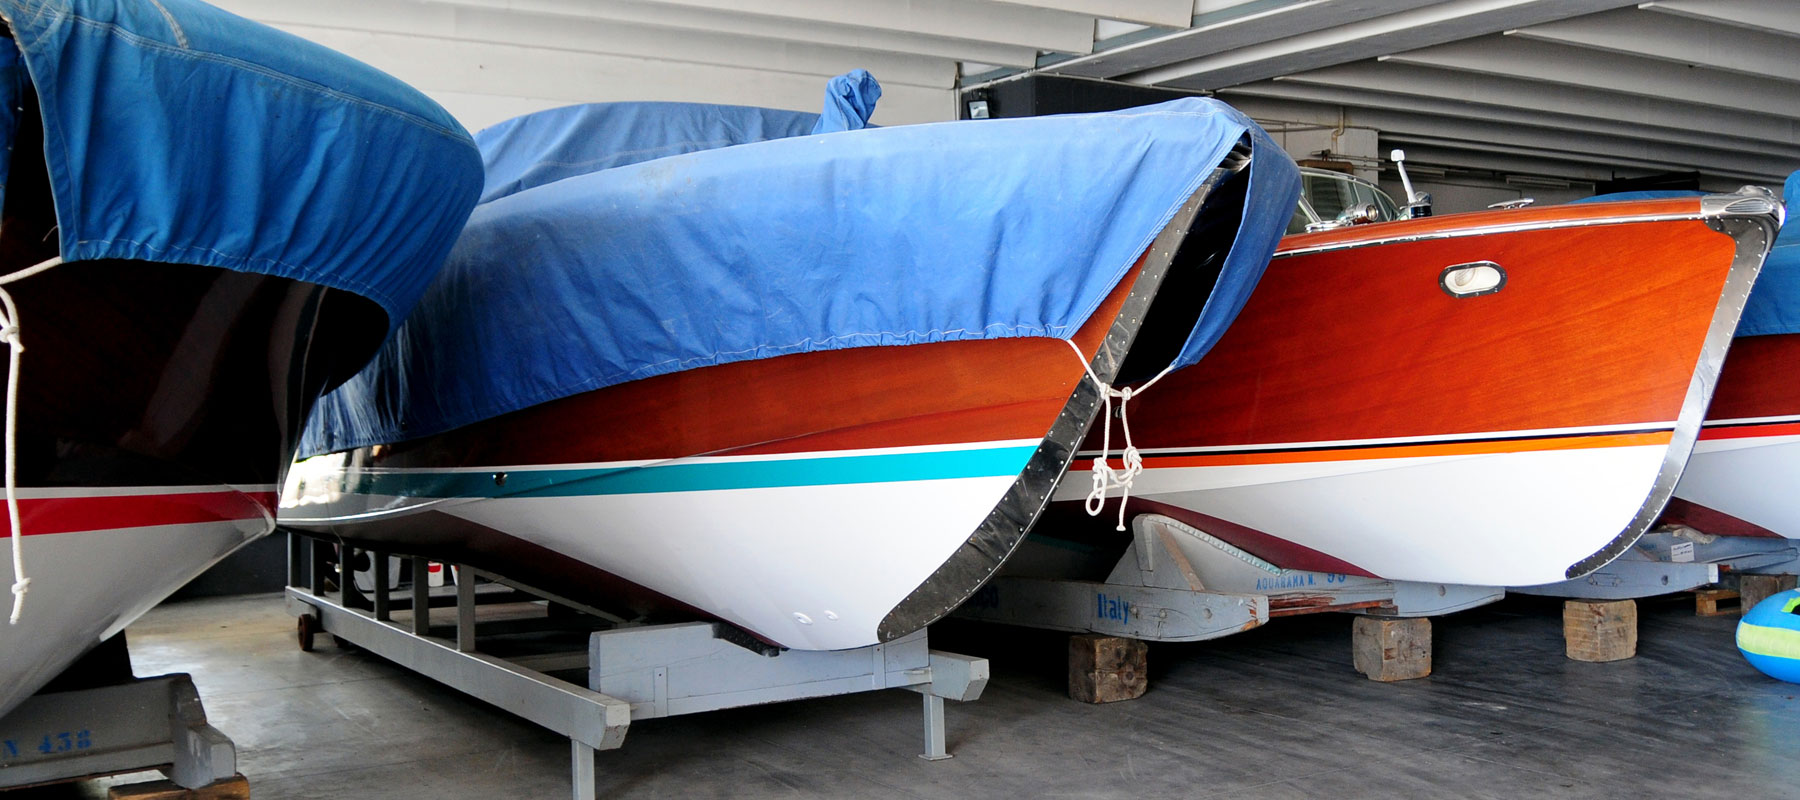 three boats lined up inside with blue covers